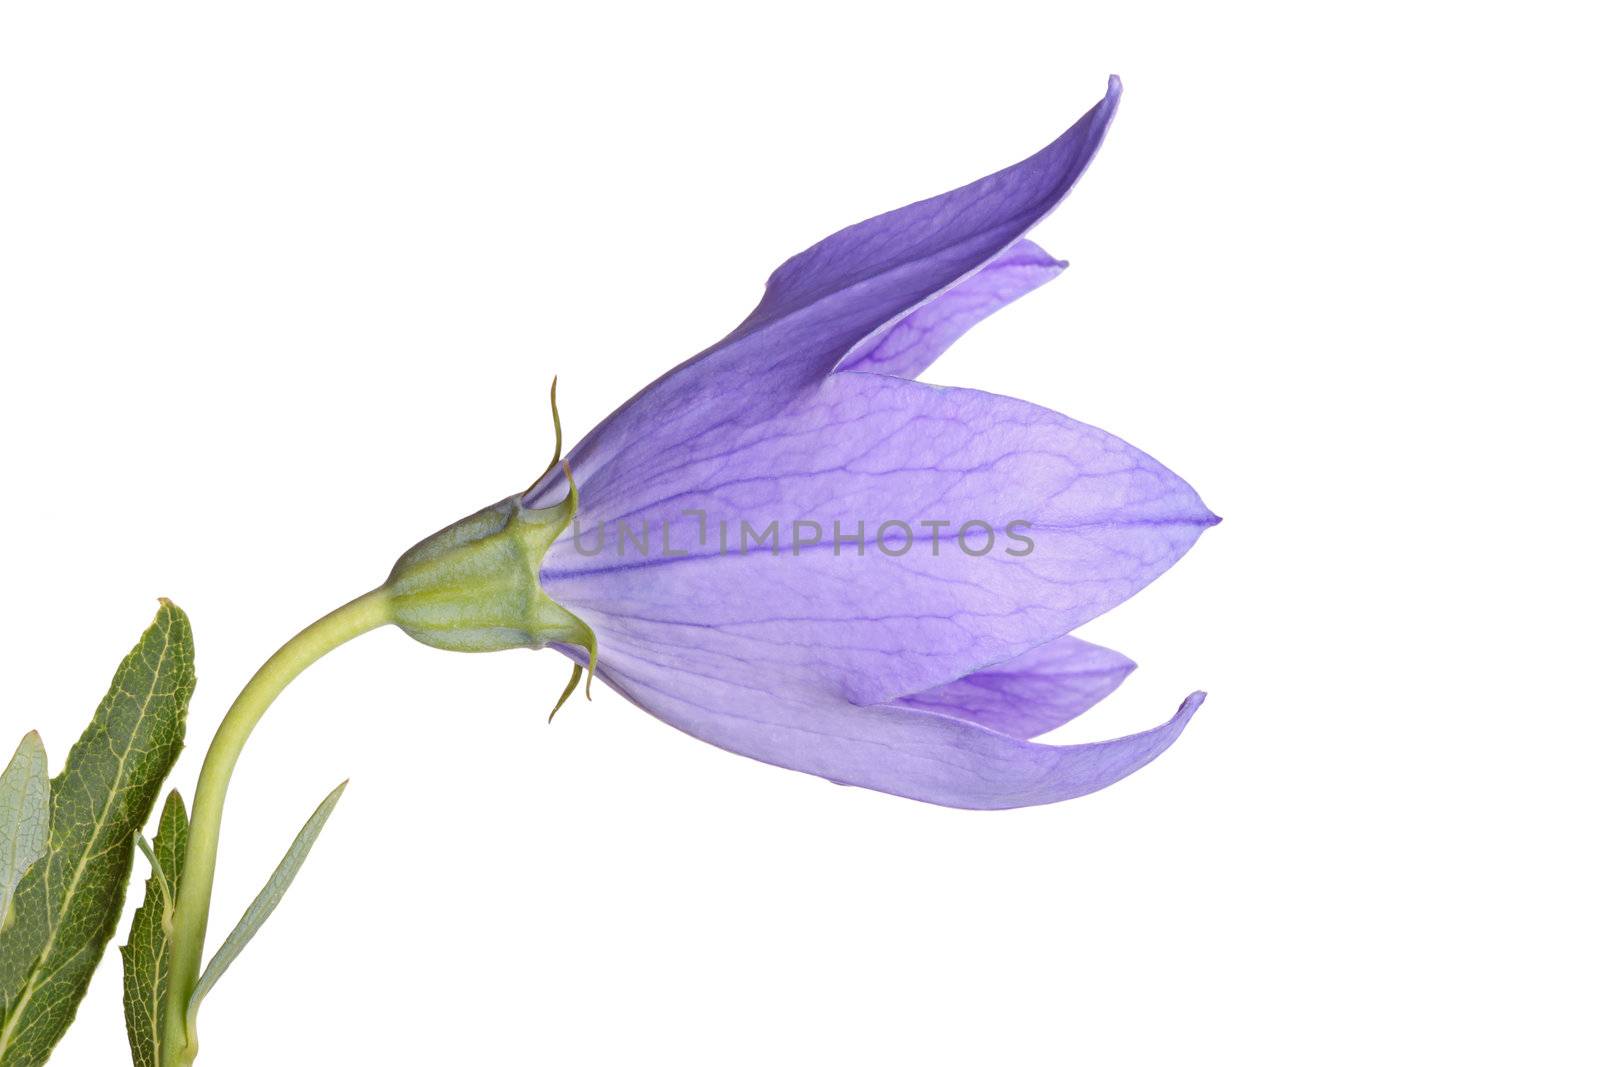 Flower and leaves of a balloon flower on white by sgoodwin4813